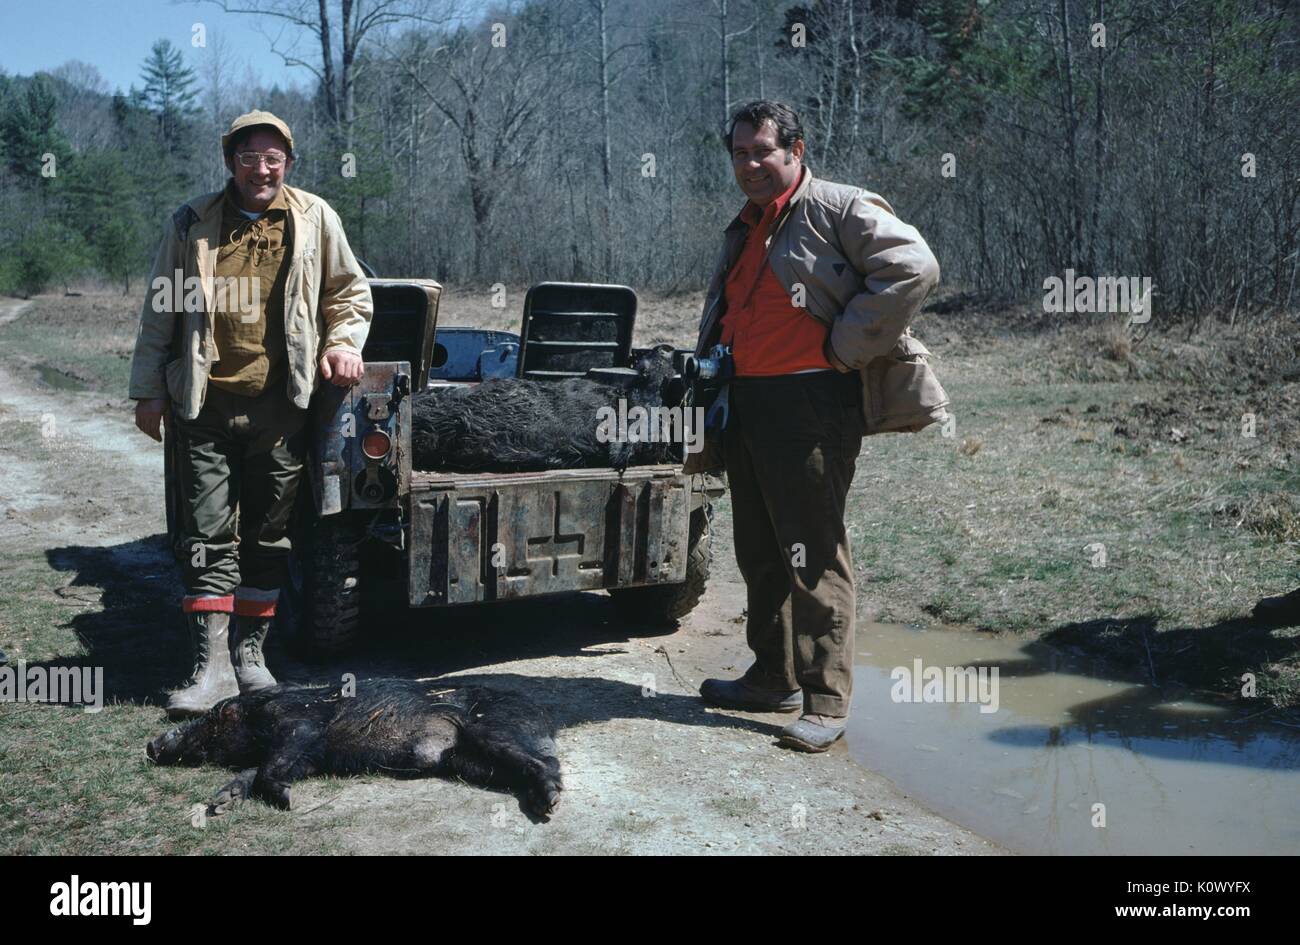 Two hunters standing on a dirt path in the woods, looking proudly at the carcass of a wild boar shot during their hunting trip, Parched Corn Creek, Kentucky, 1975. Photo credit Smith Collection/Gado/Getty Images. Stock Photo